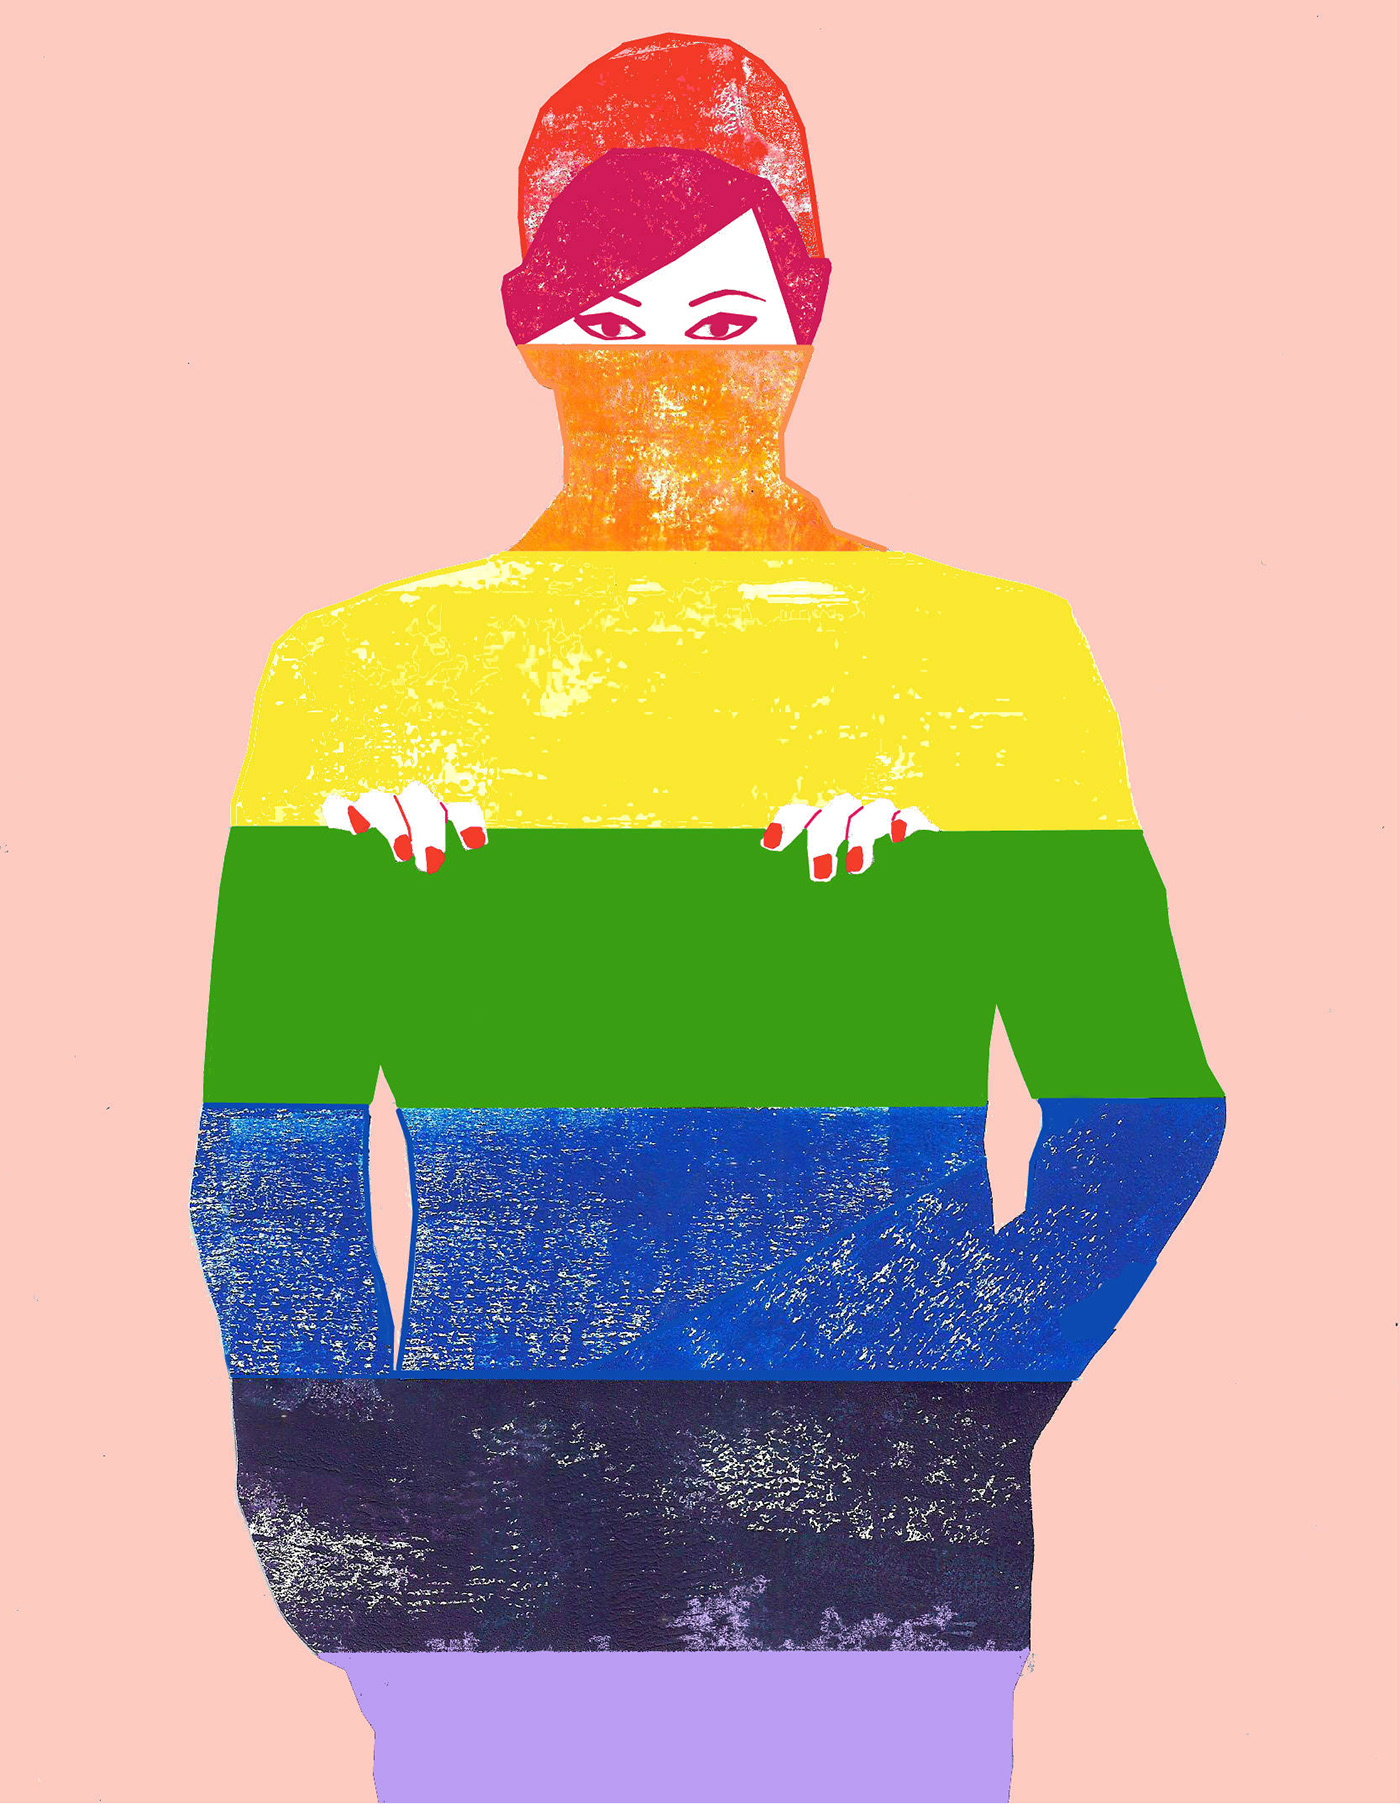 catherine paiano art ILLUSTRATION  gay art queer rainbow Exhibition  lux moving image LGBTQ+